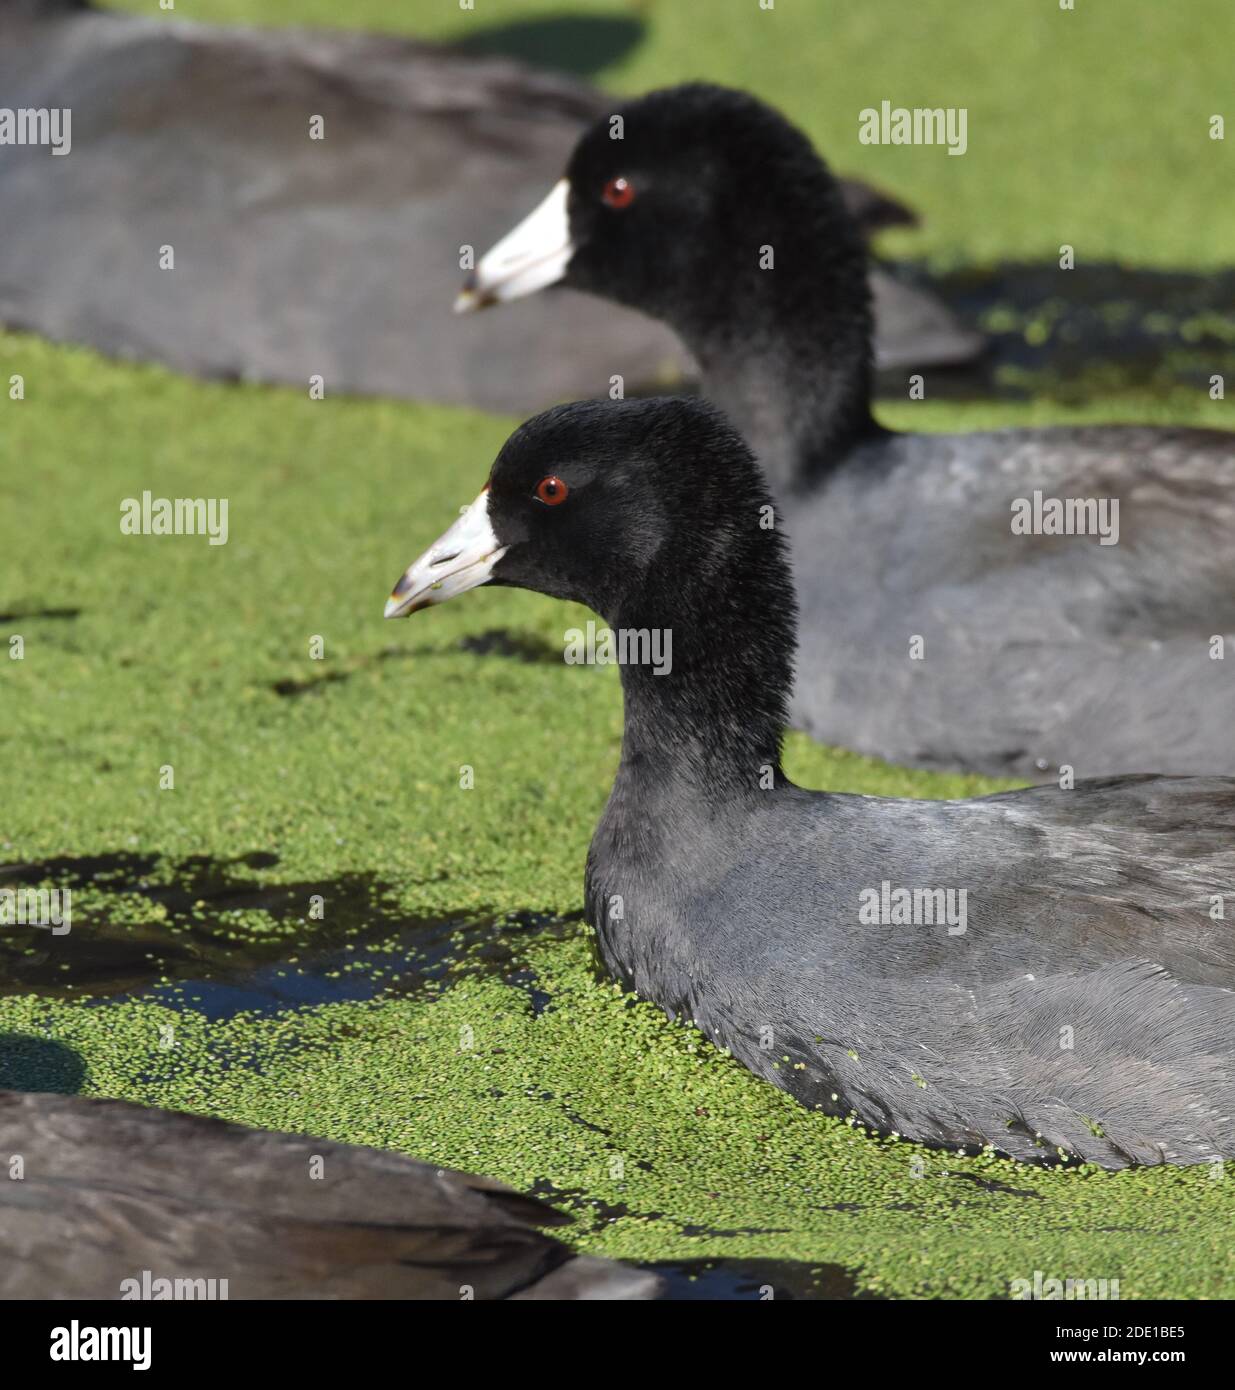 A pair of American coots (Fulica americana) swimming through duckweed  on the surface of Pinto Lake in California Stock Photo